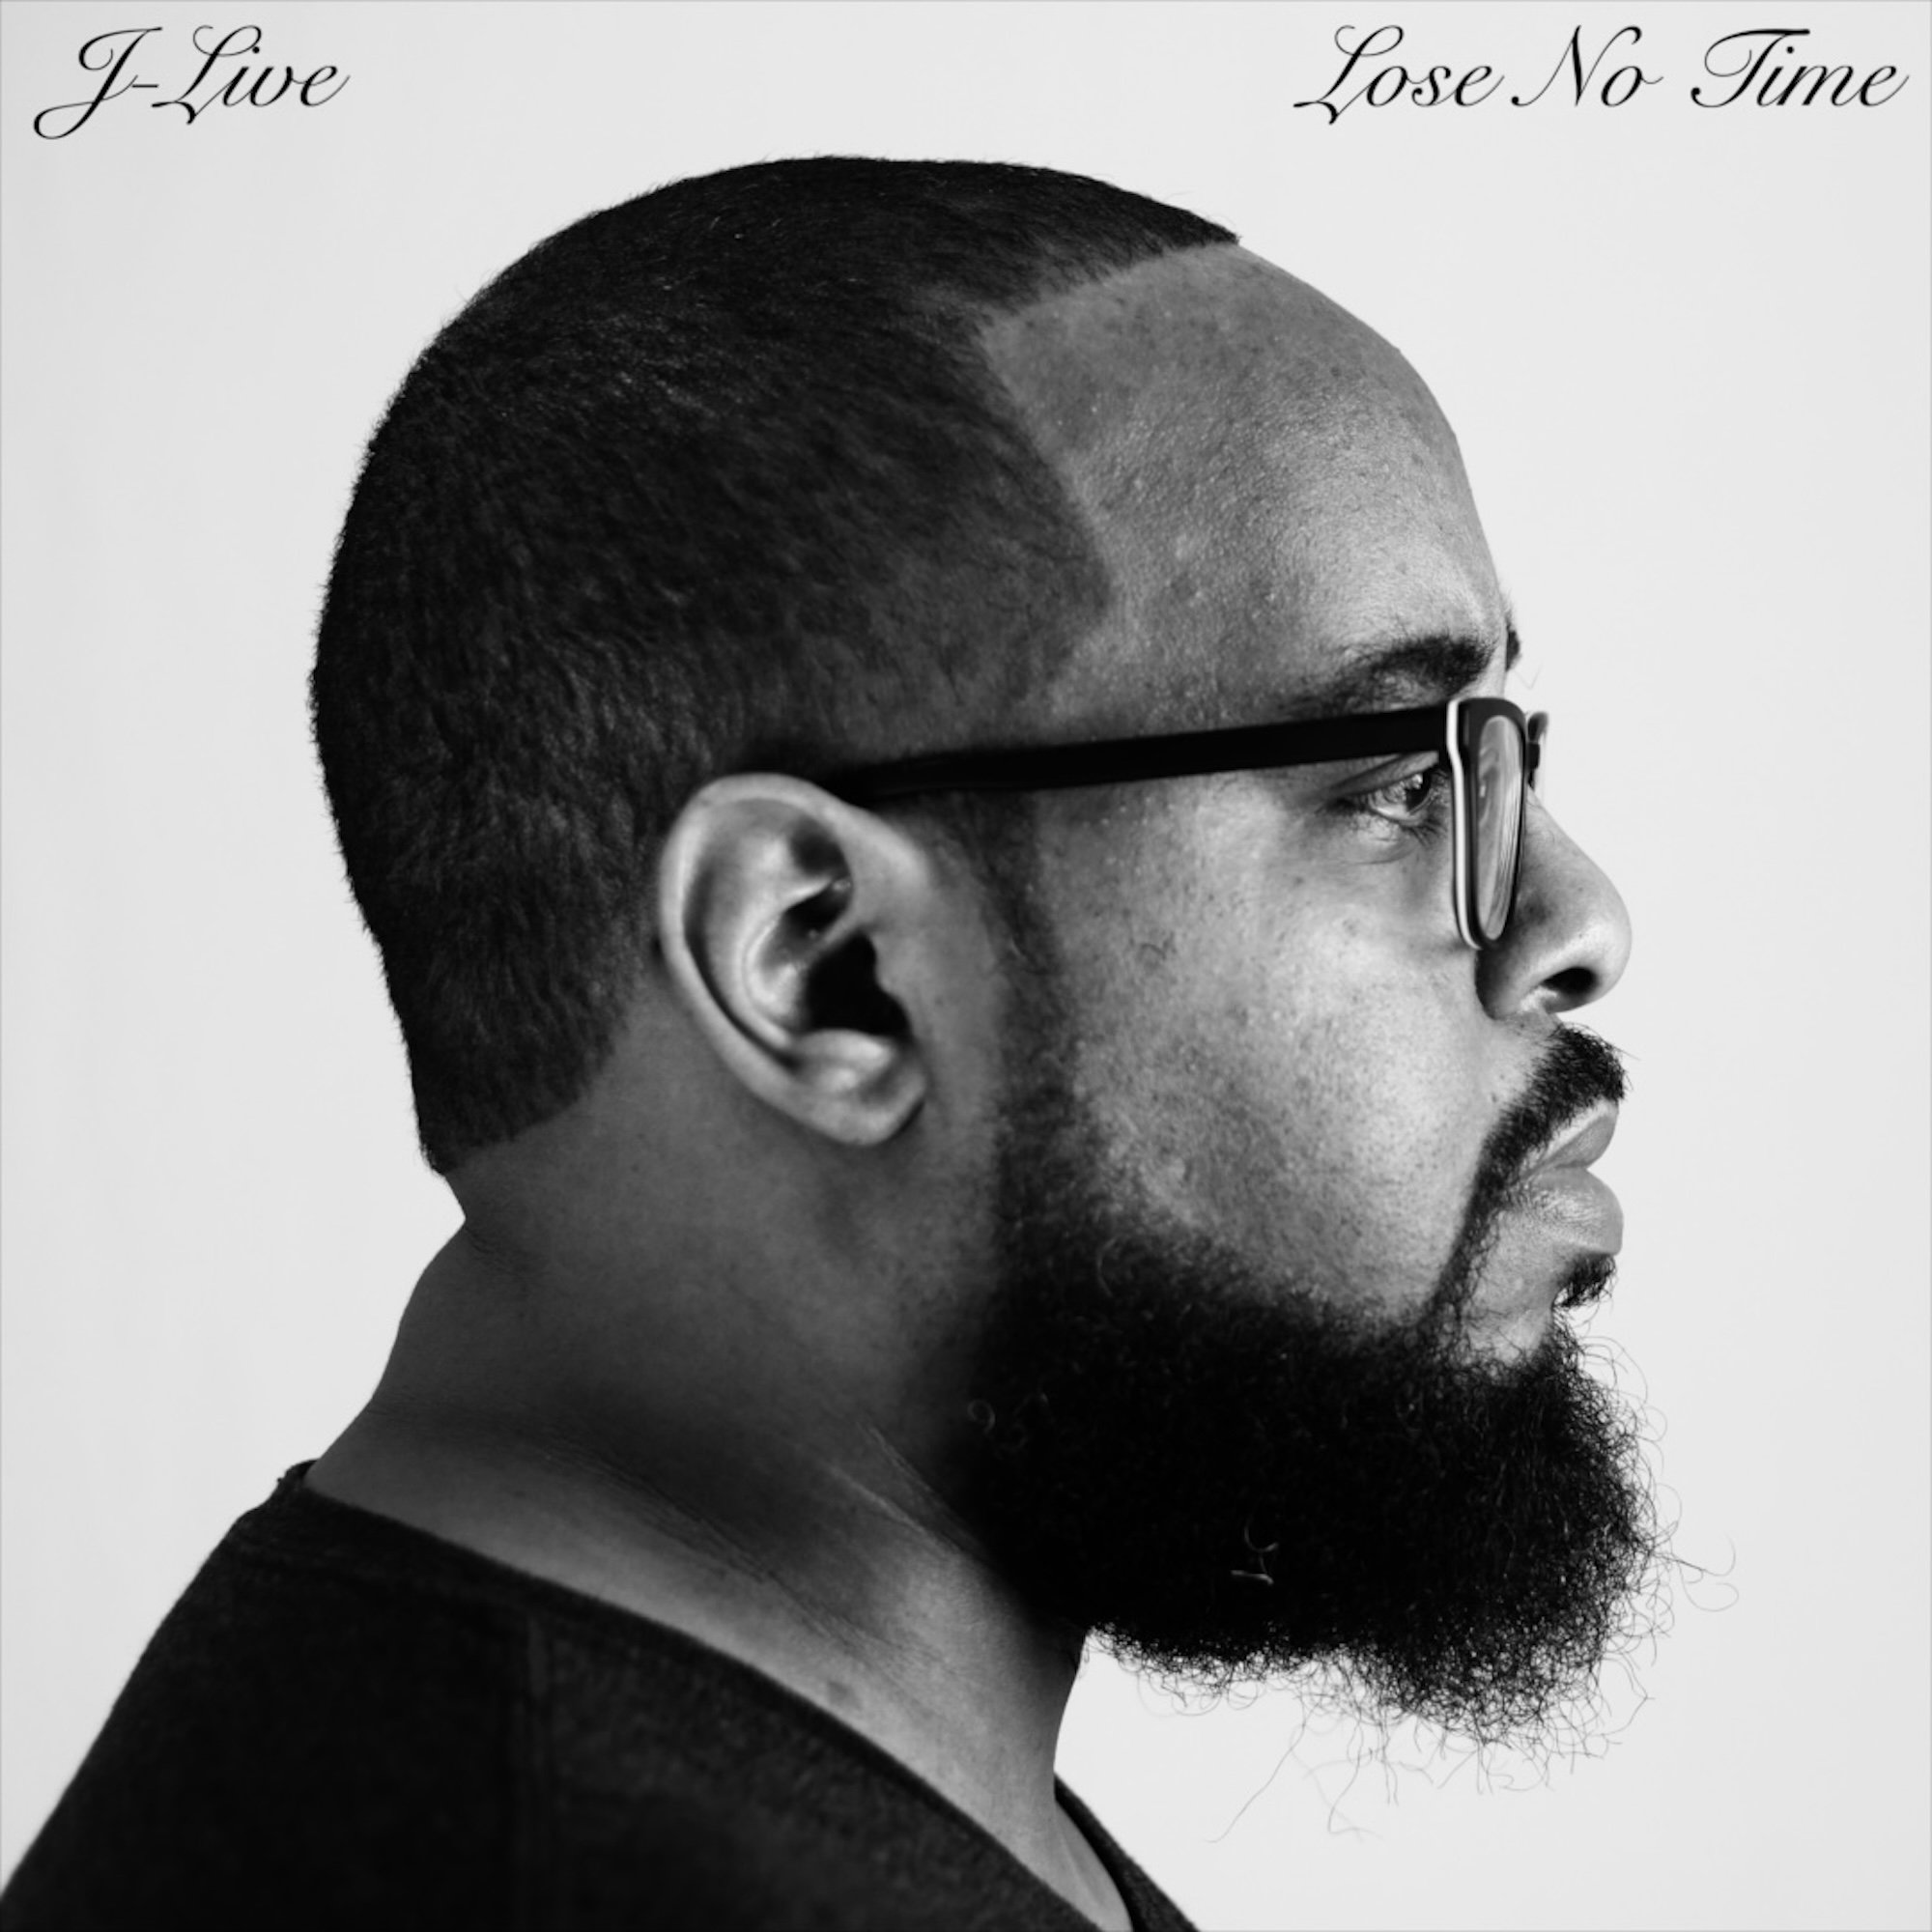 New Music From J-Live "Lose No Time" (Single)